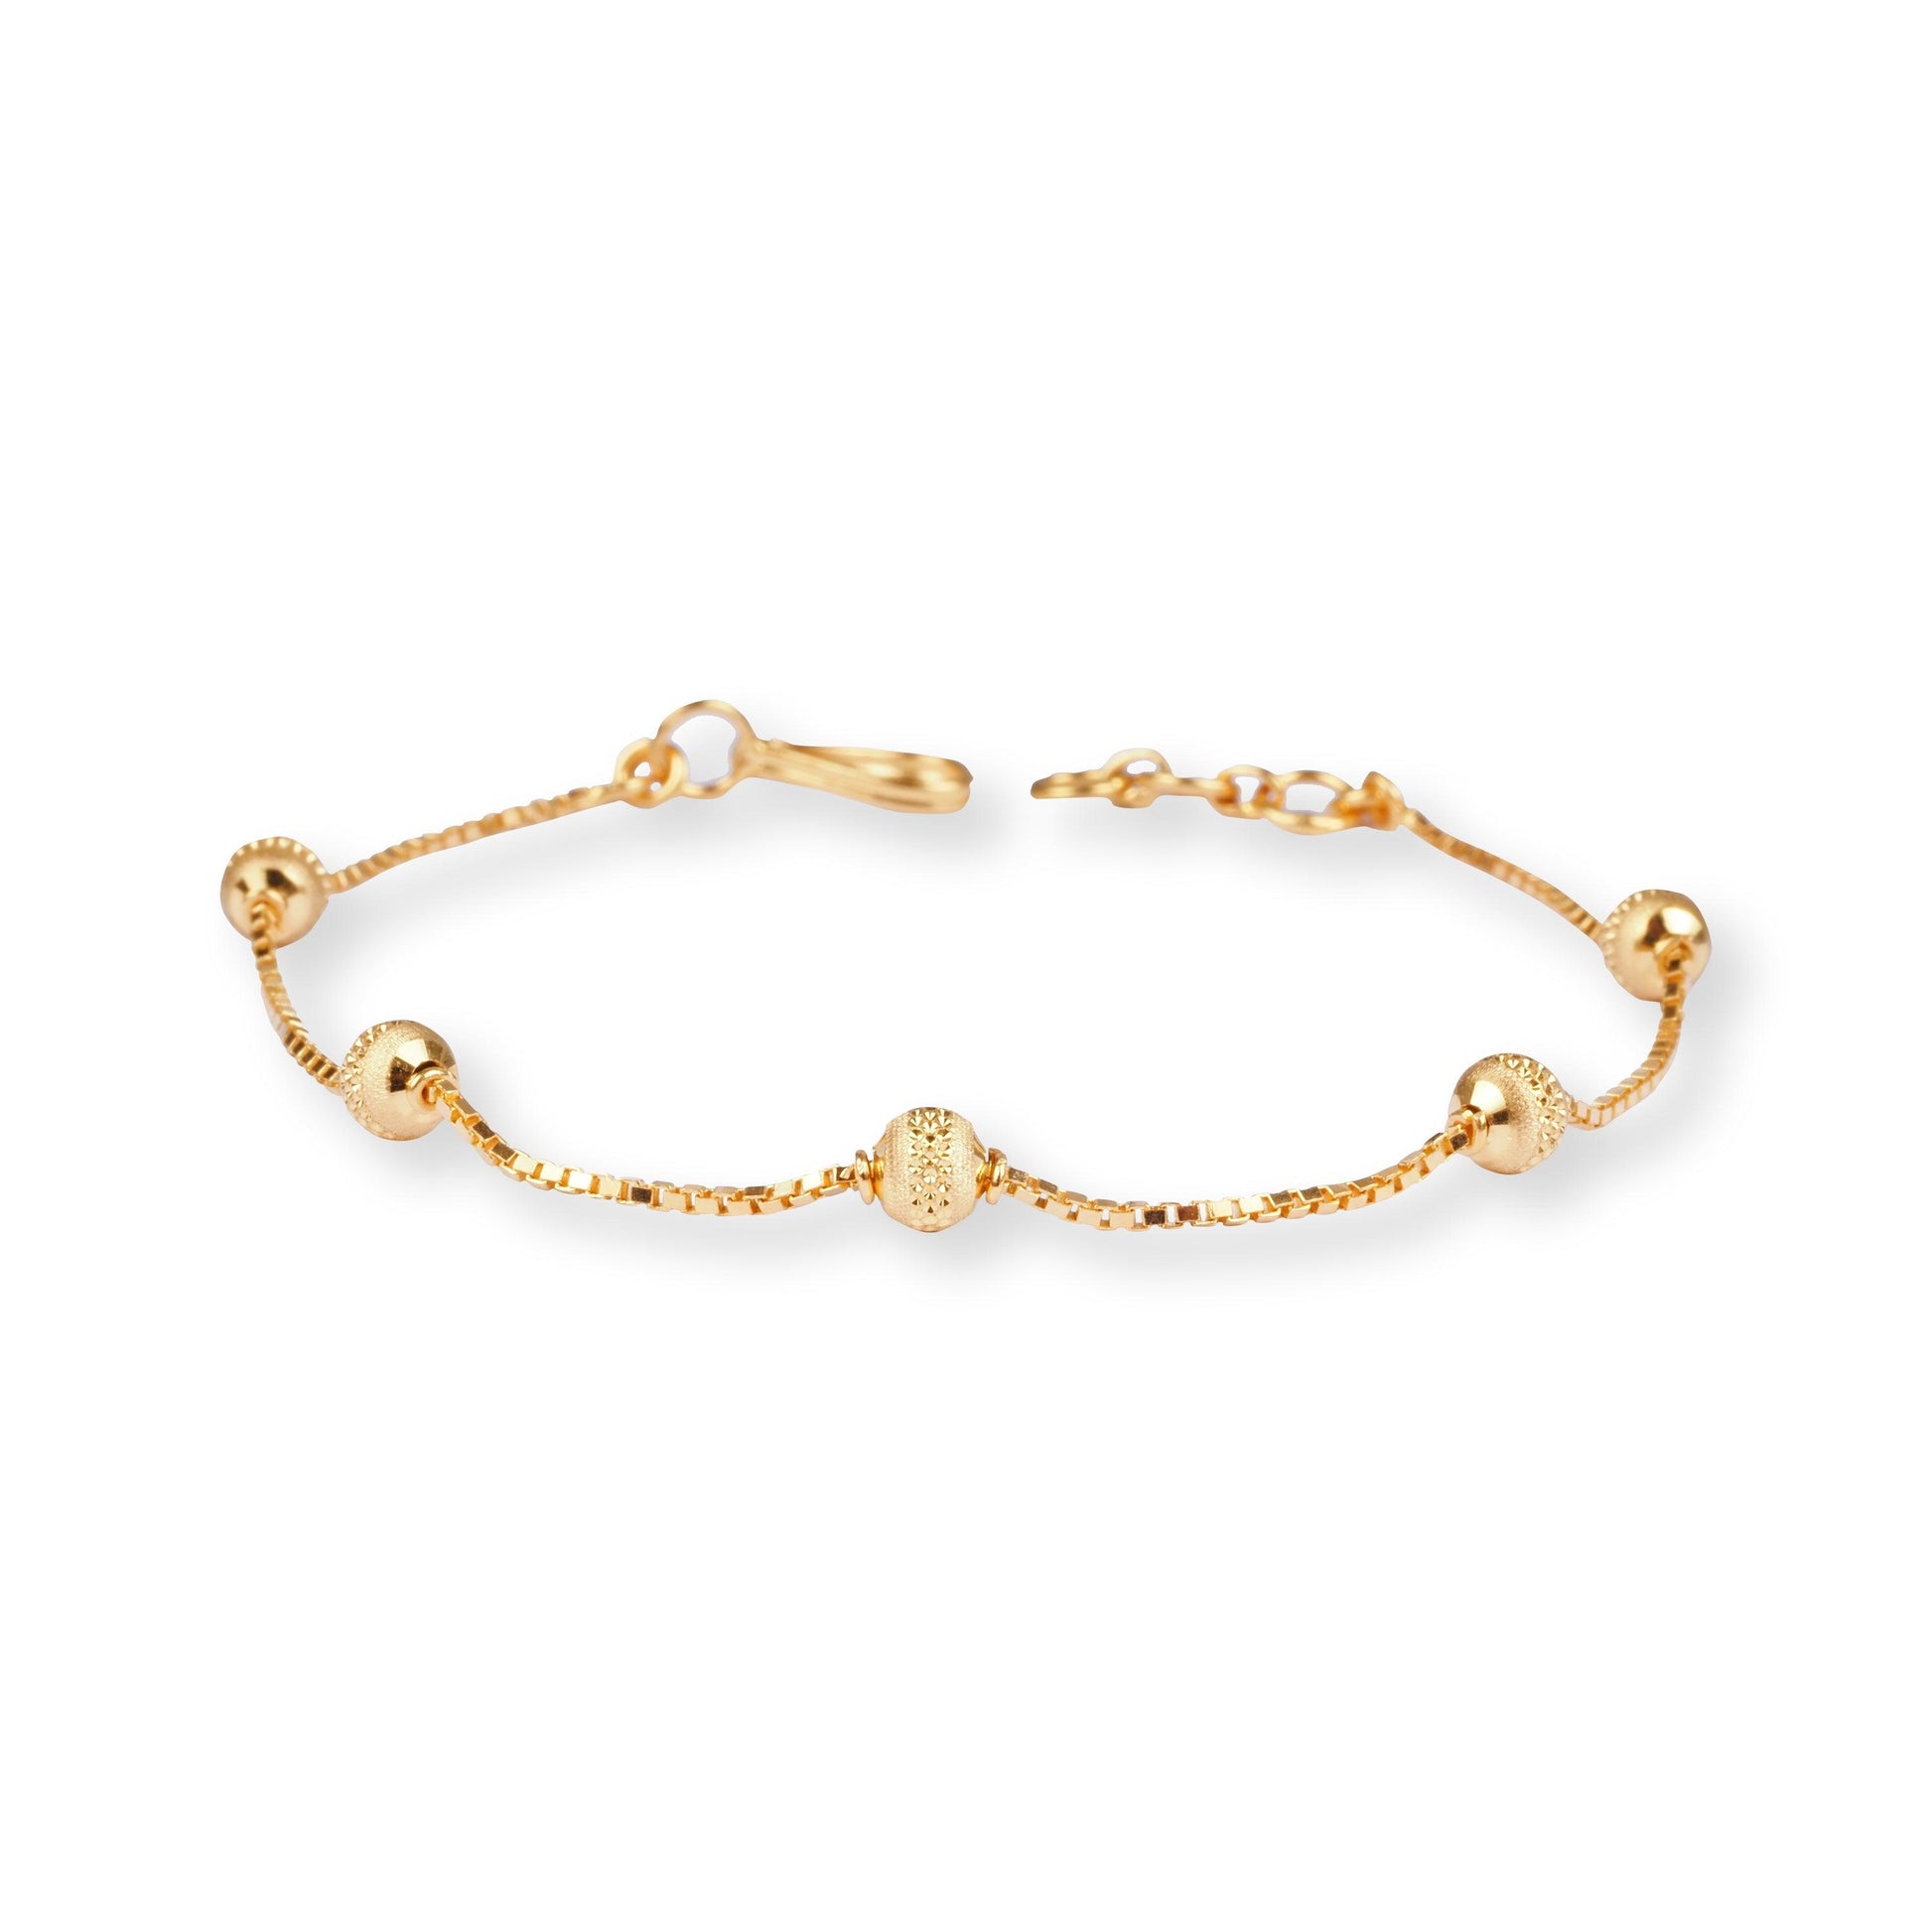 22ct Yellow Gold Bracelet with Diamond Cut Beads and Hook Clasp LBR-8495 - Minar Jewellers